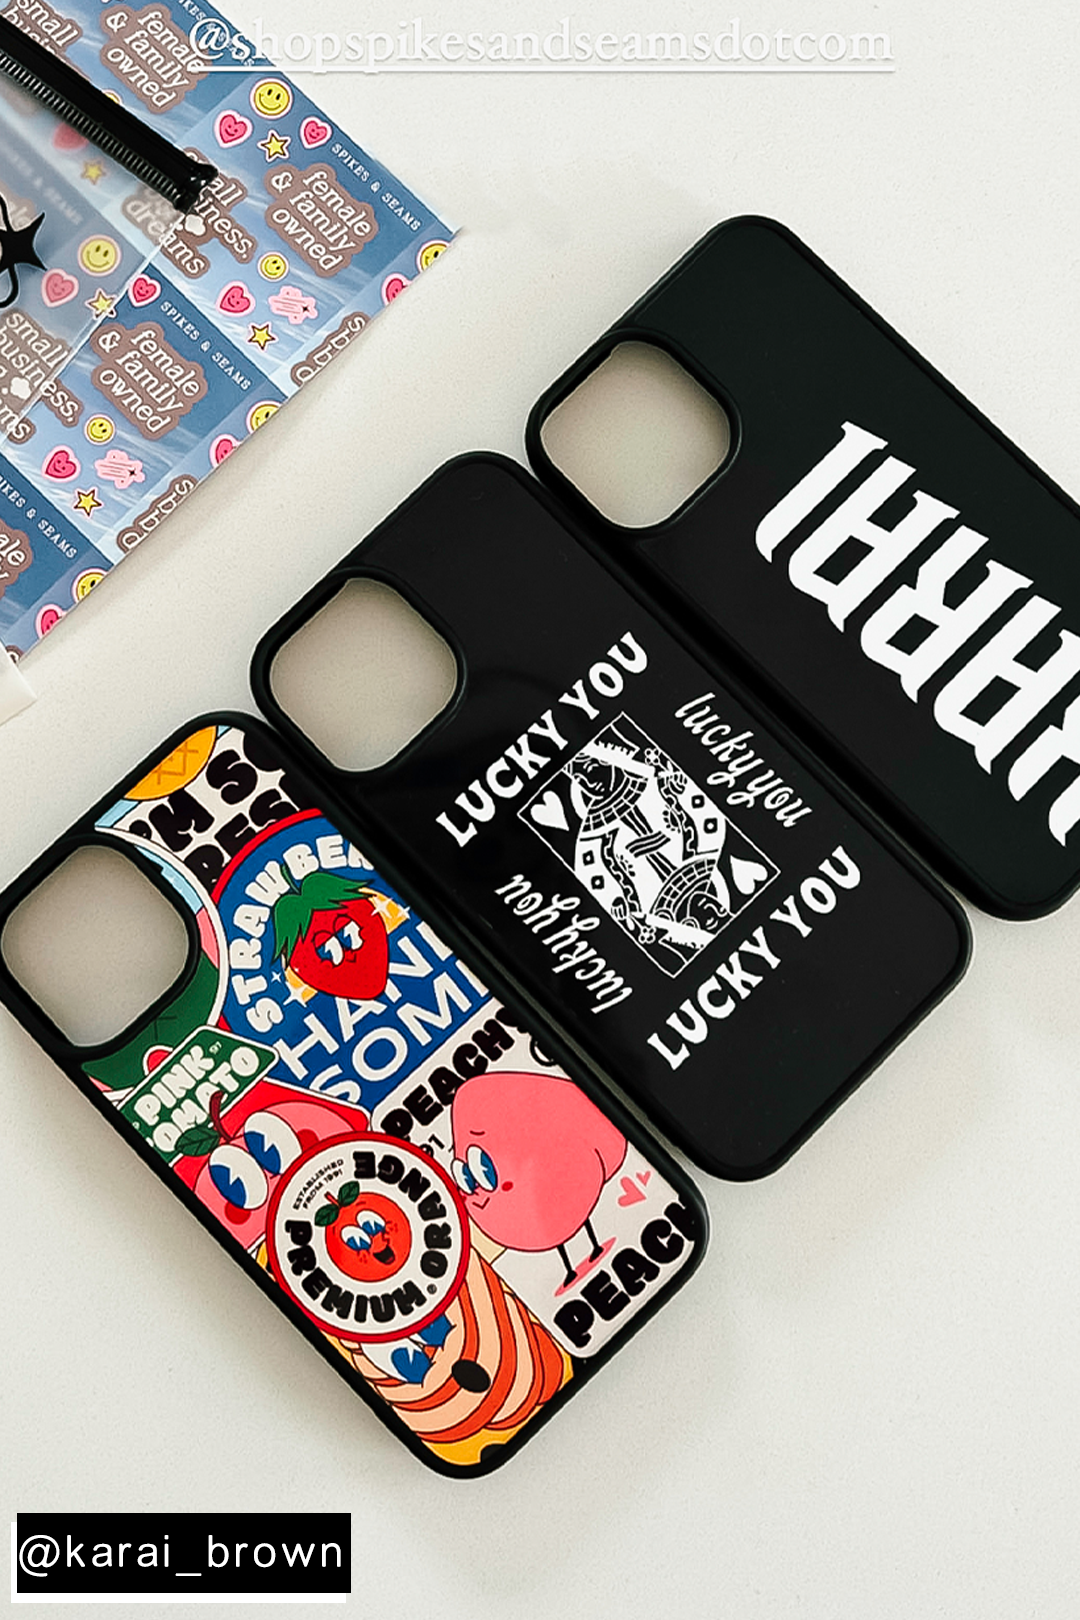 Gothic iPhone case - choose your text!